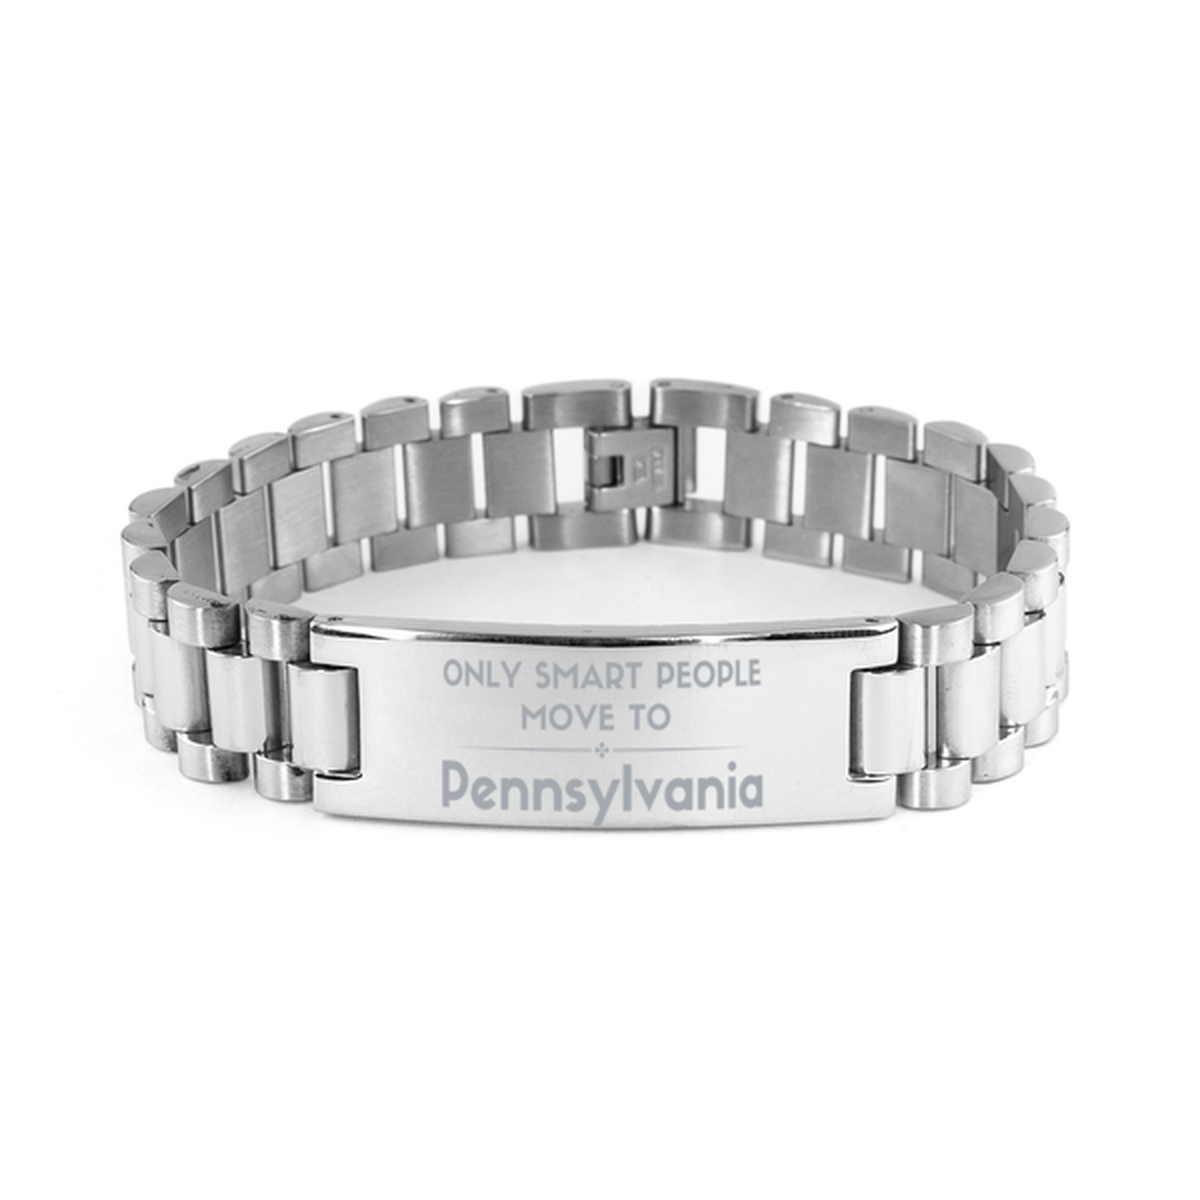 Only smart people move to Pennsylvania Ladder Stainless Steel Bracelet, Gag Gifts For Pennsylvania, Move to Pennsylvania Gifts for Friends Coworker Funny Saying Quote